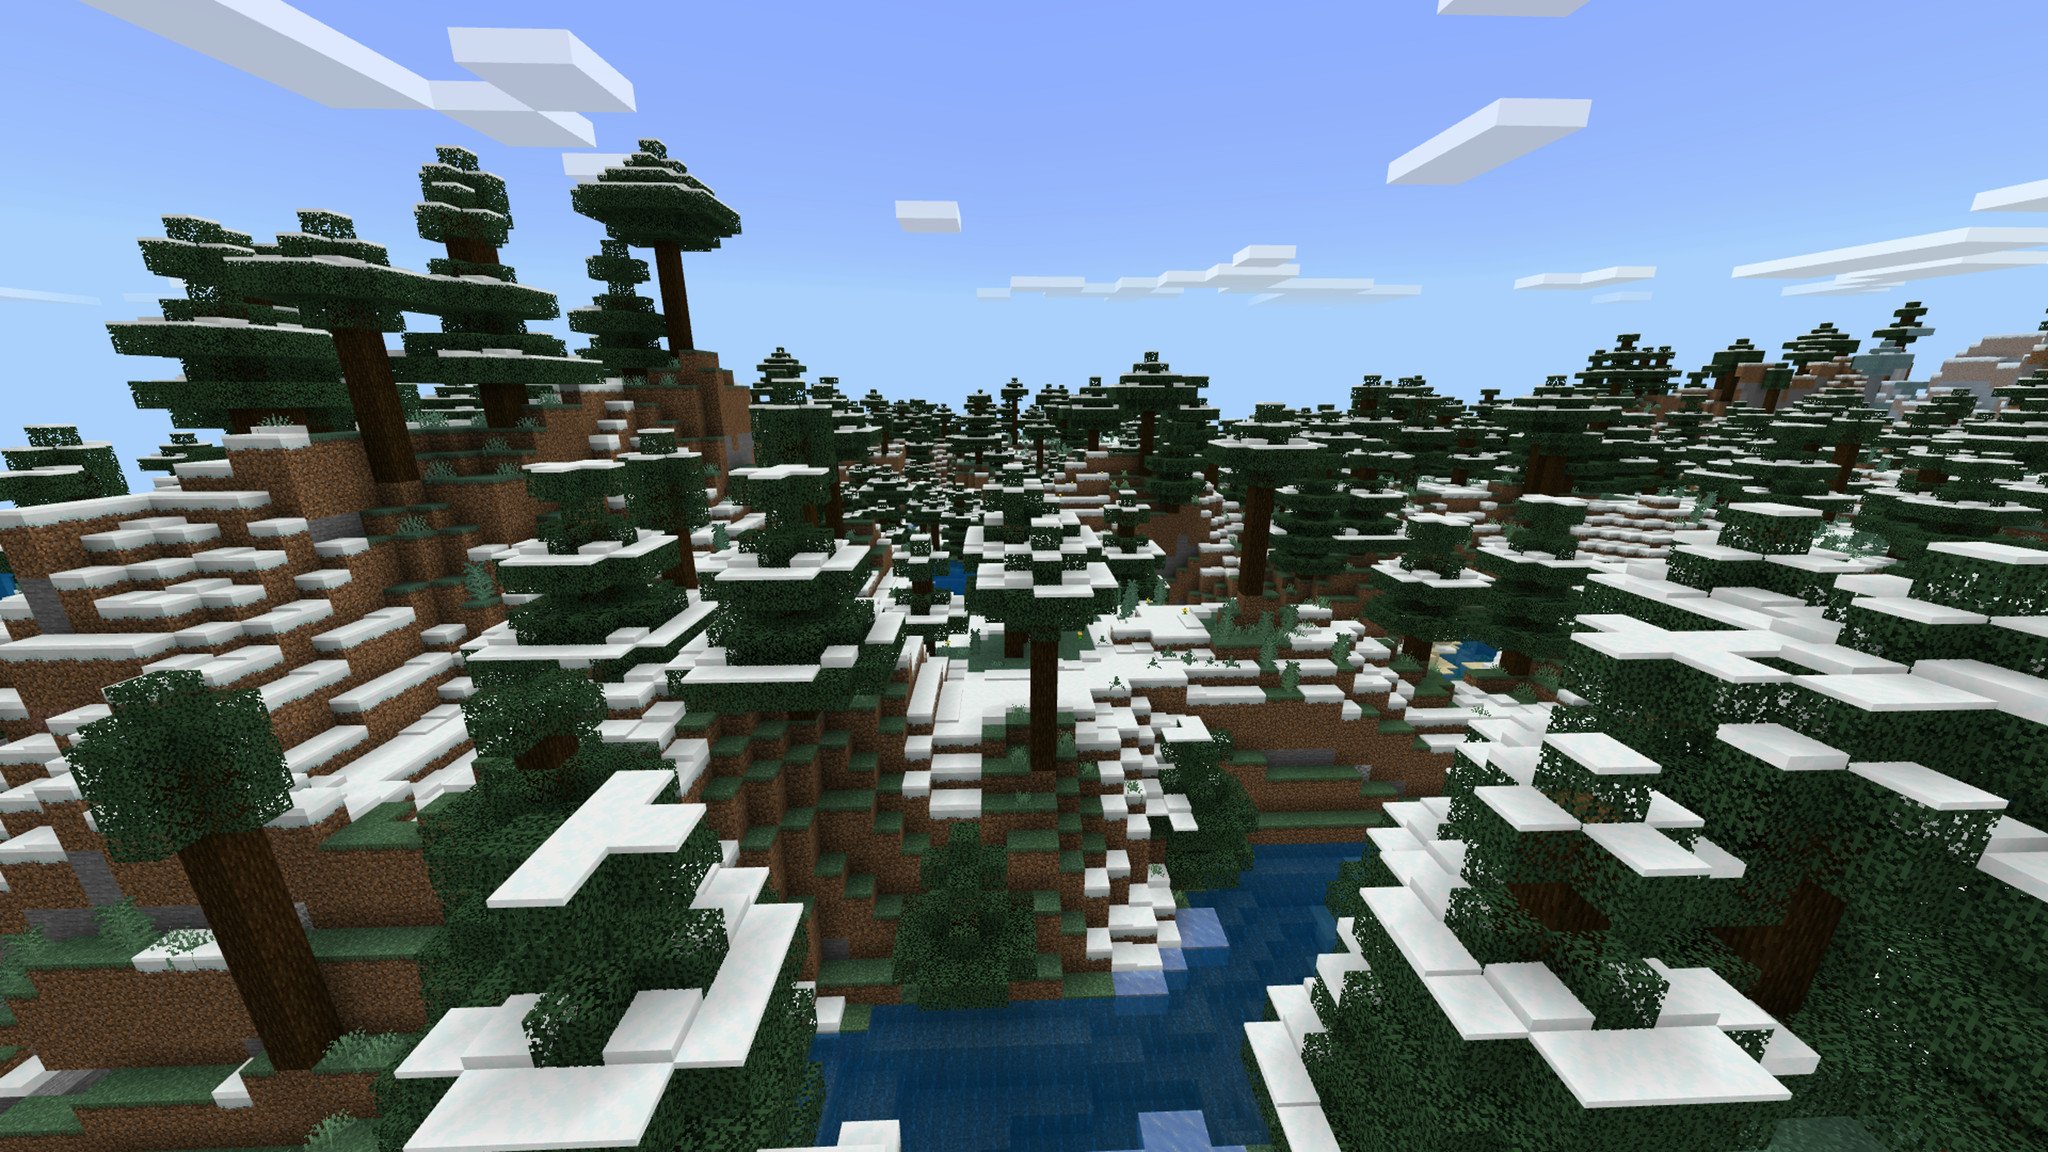 Minecraft Guide To Biomes A List Of Every Biome Currently In The